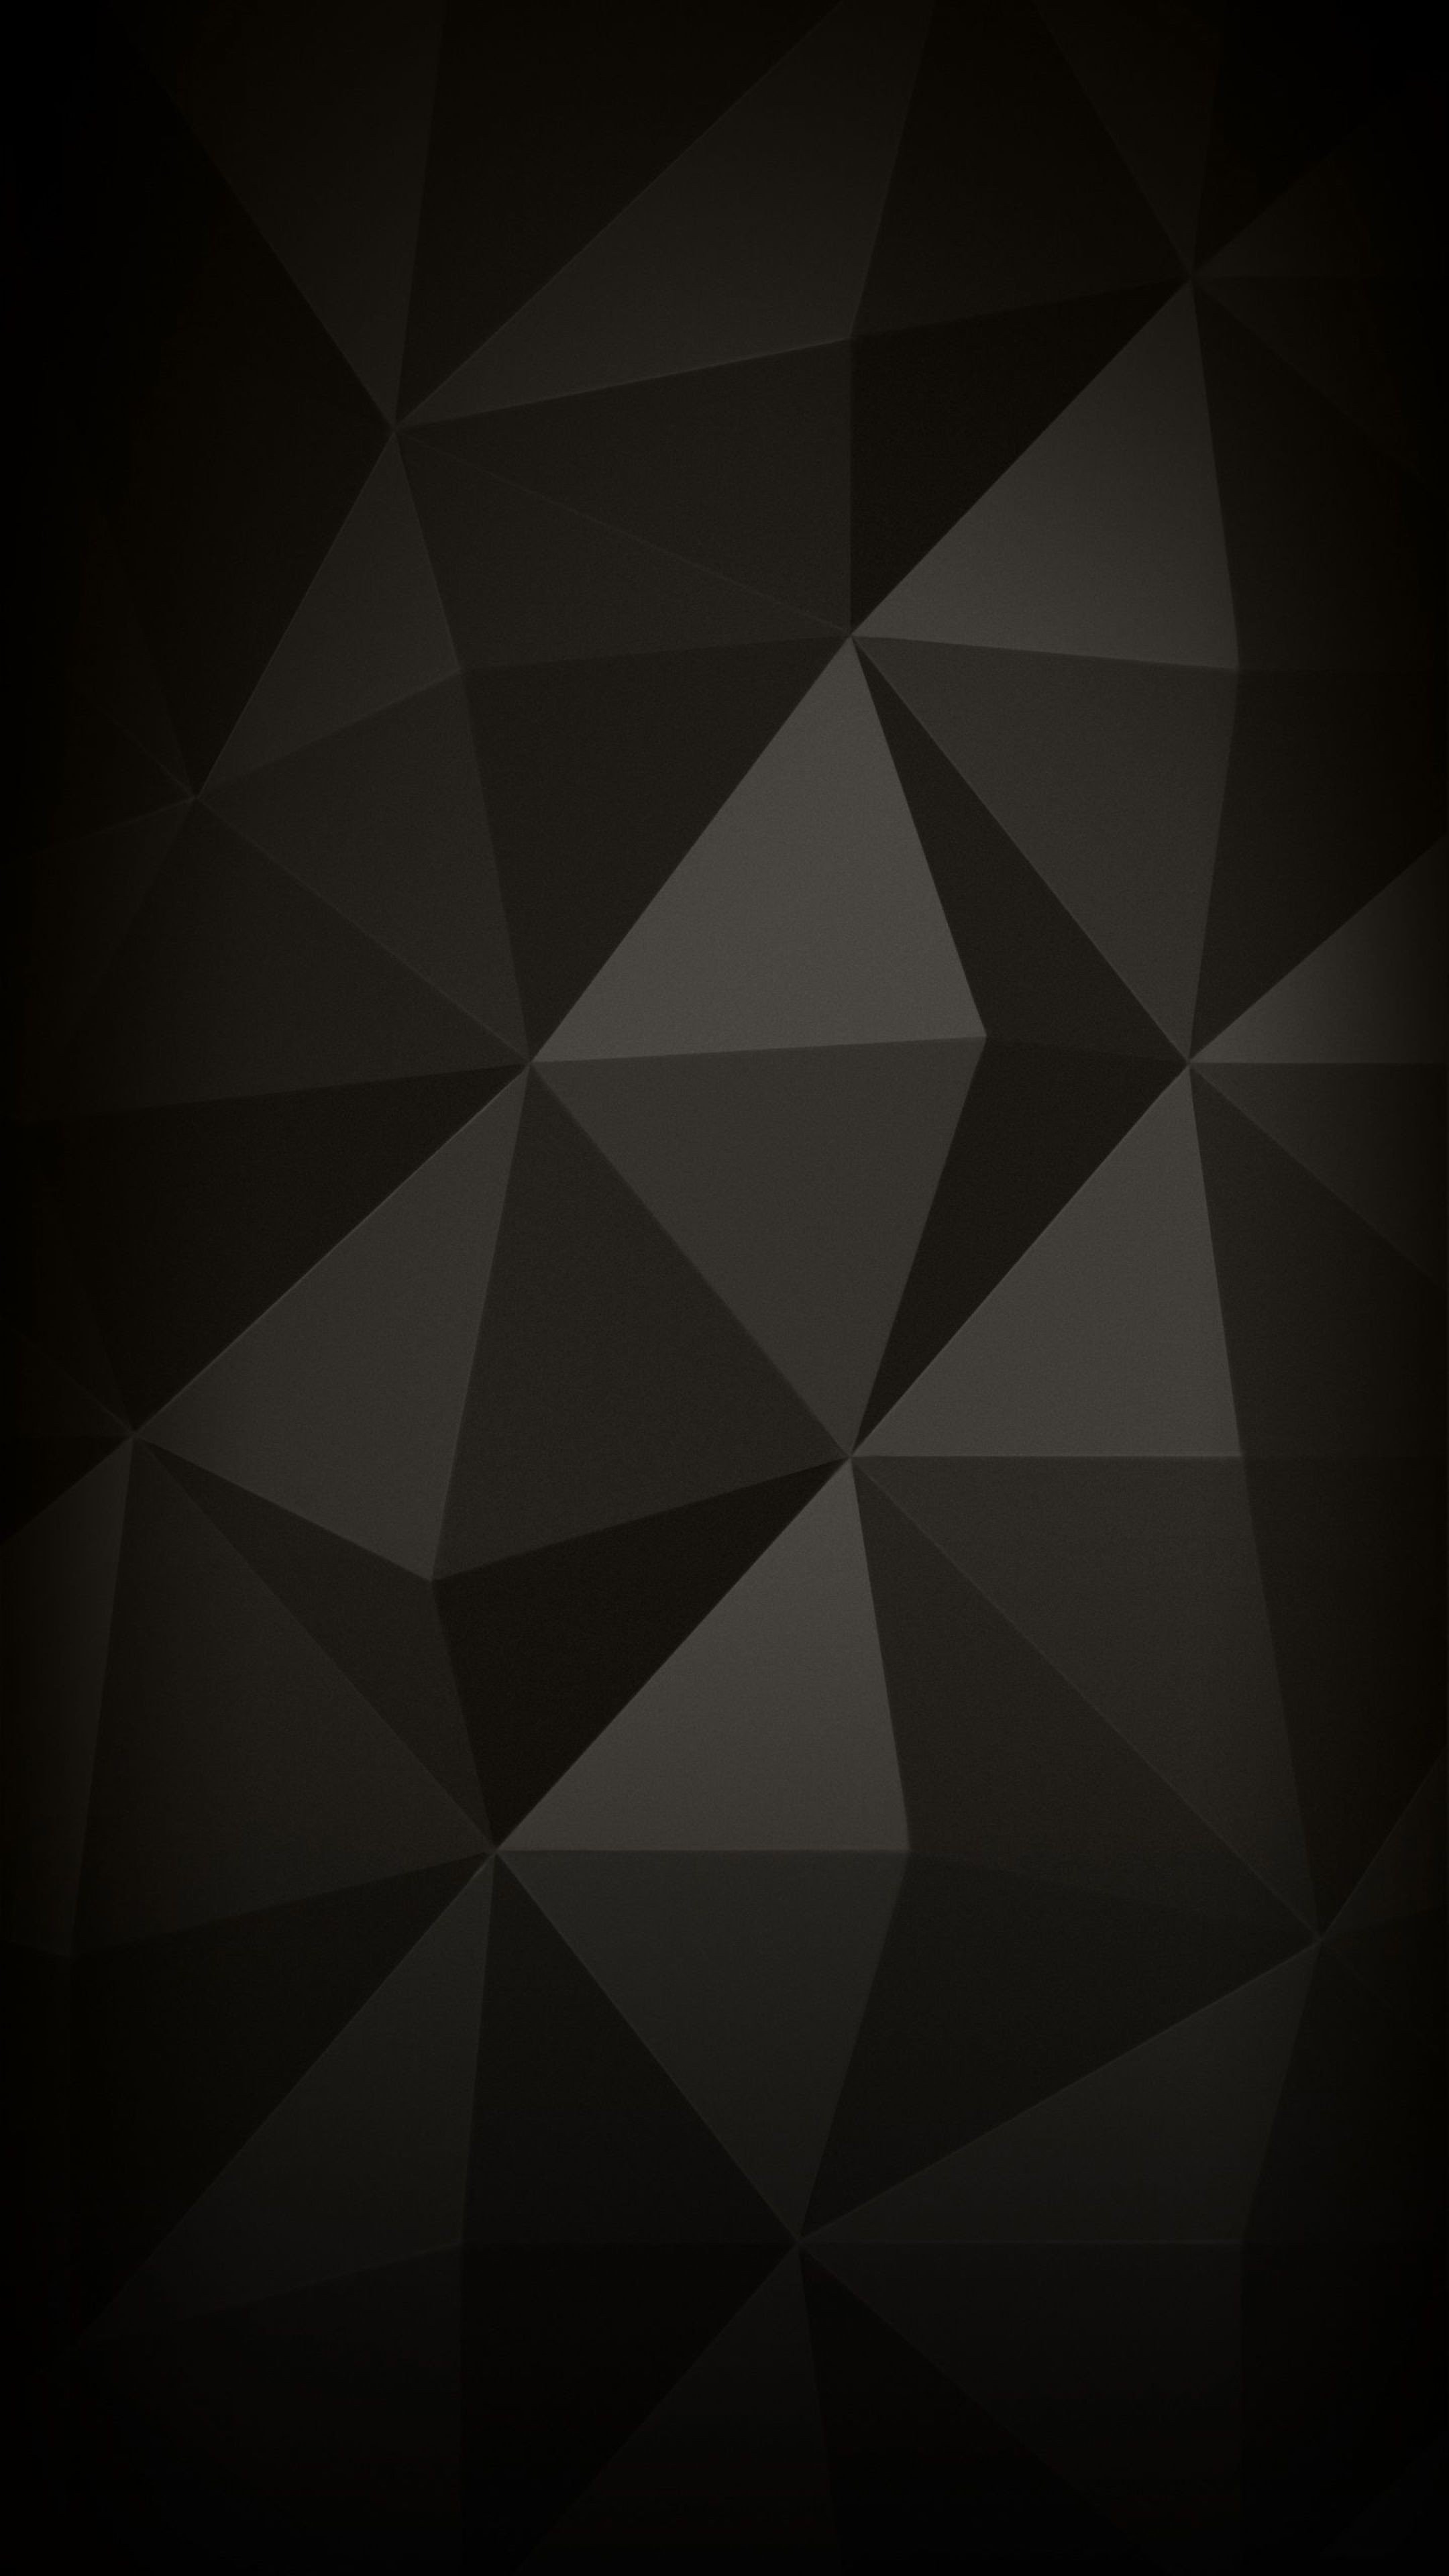 Ultra Hd 4k Black Abstract Mobile Phone Wallpaper 1 2160x3840